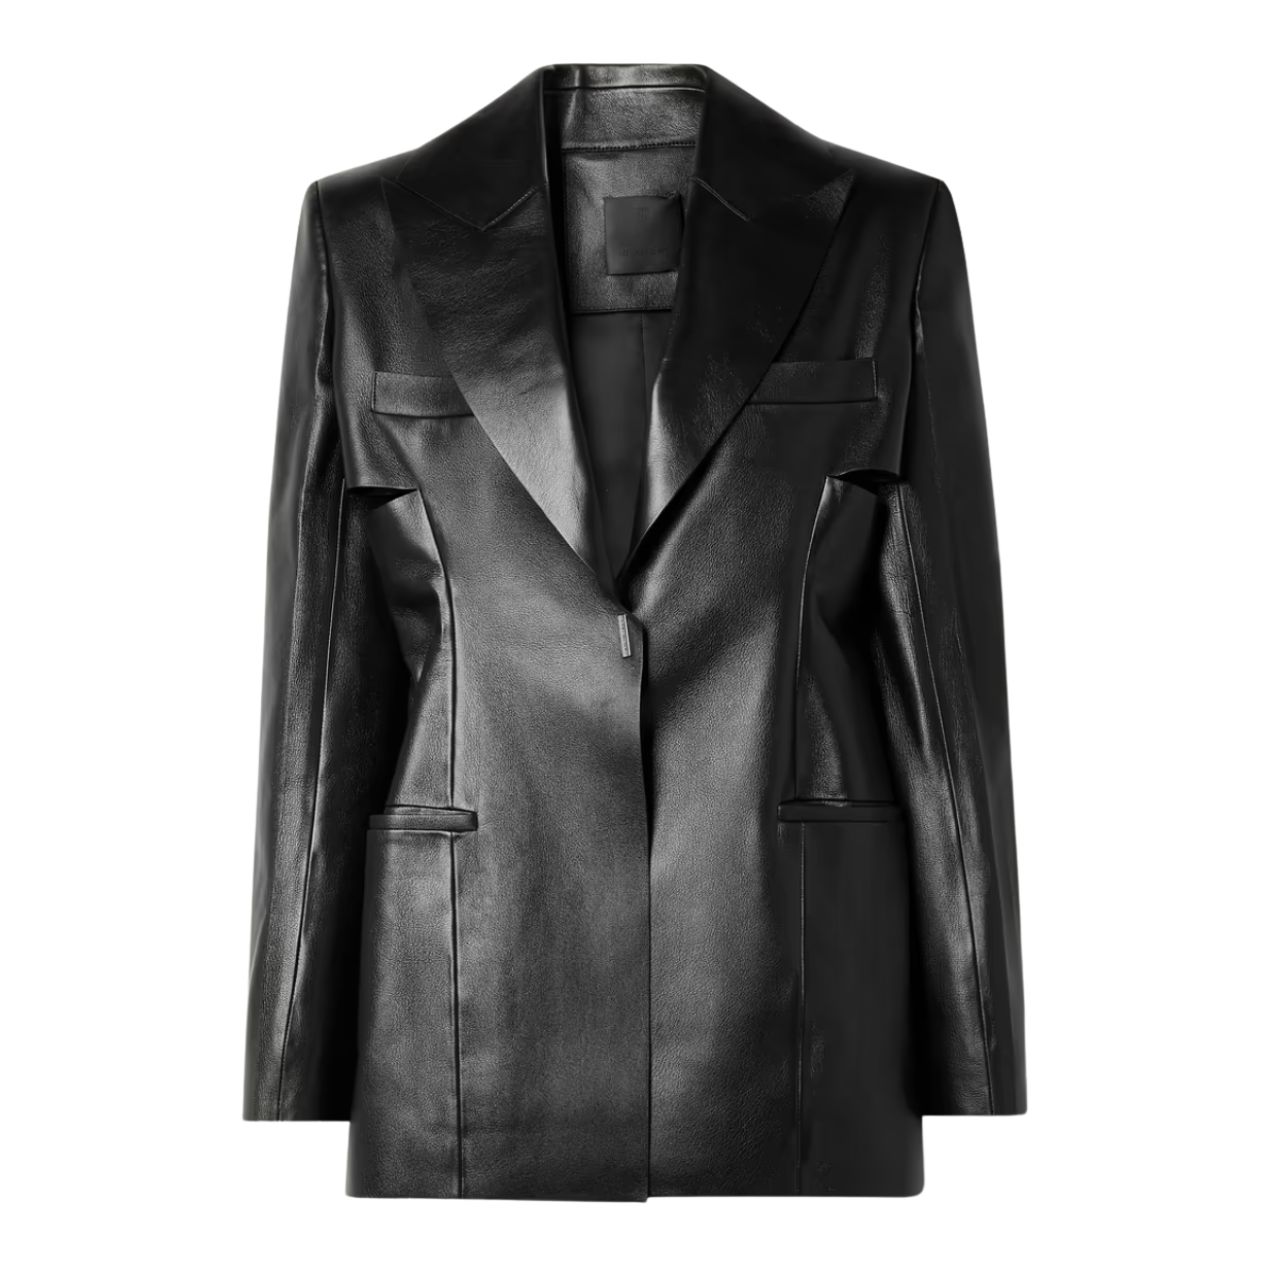 Cutout leather blazer, available at Neiman Marcus.